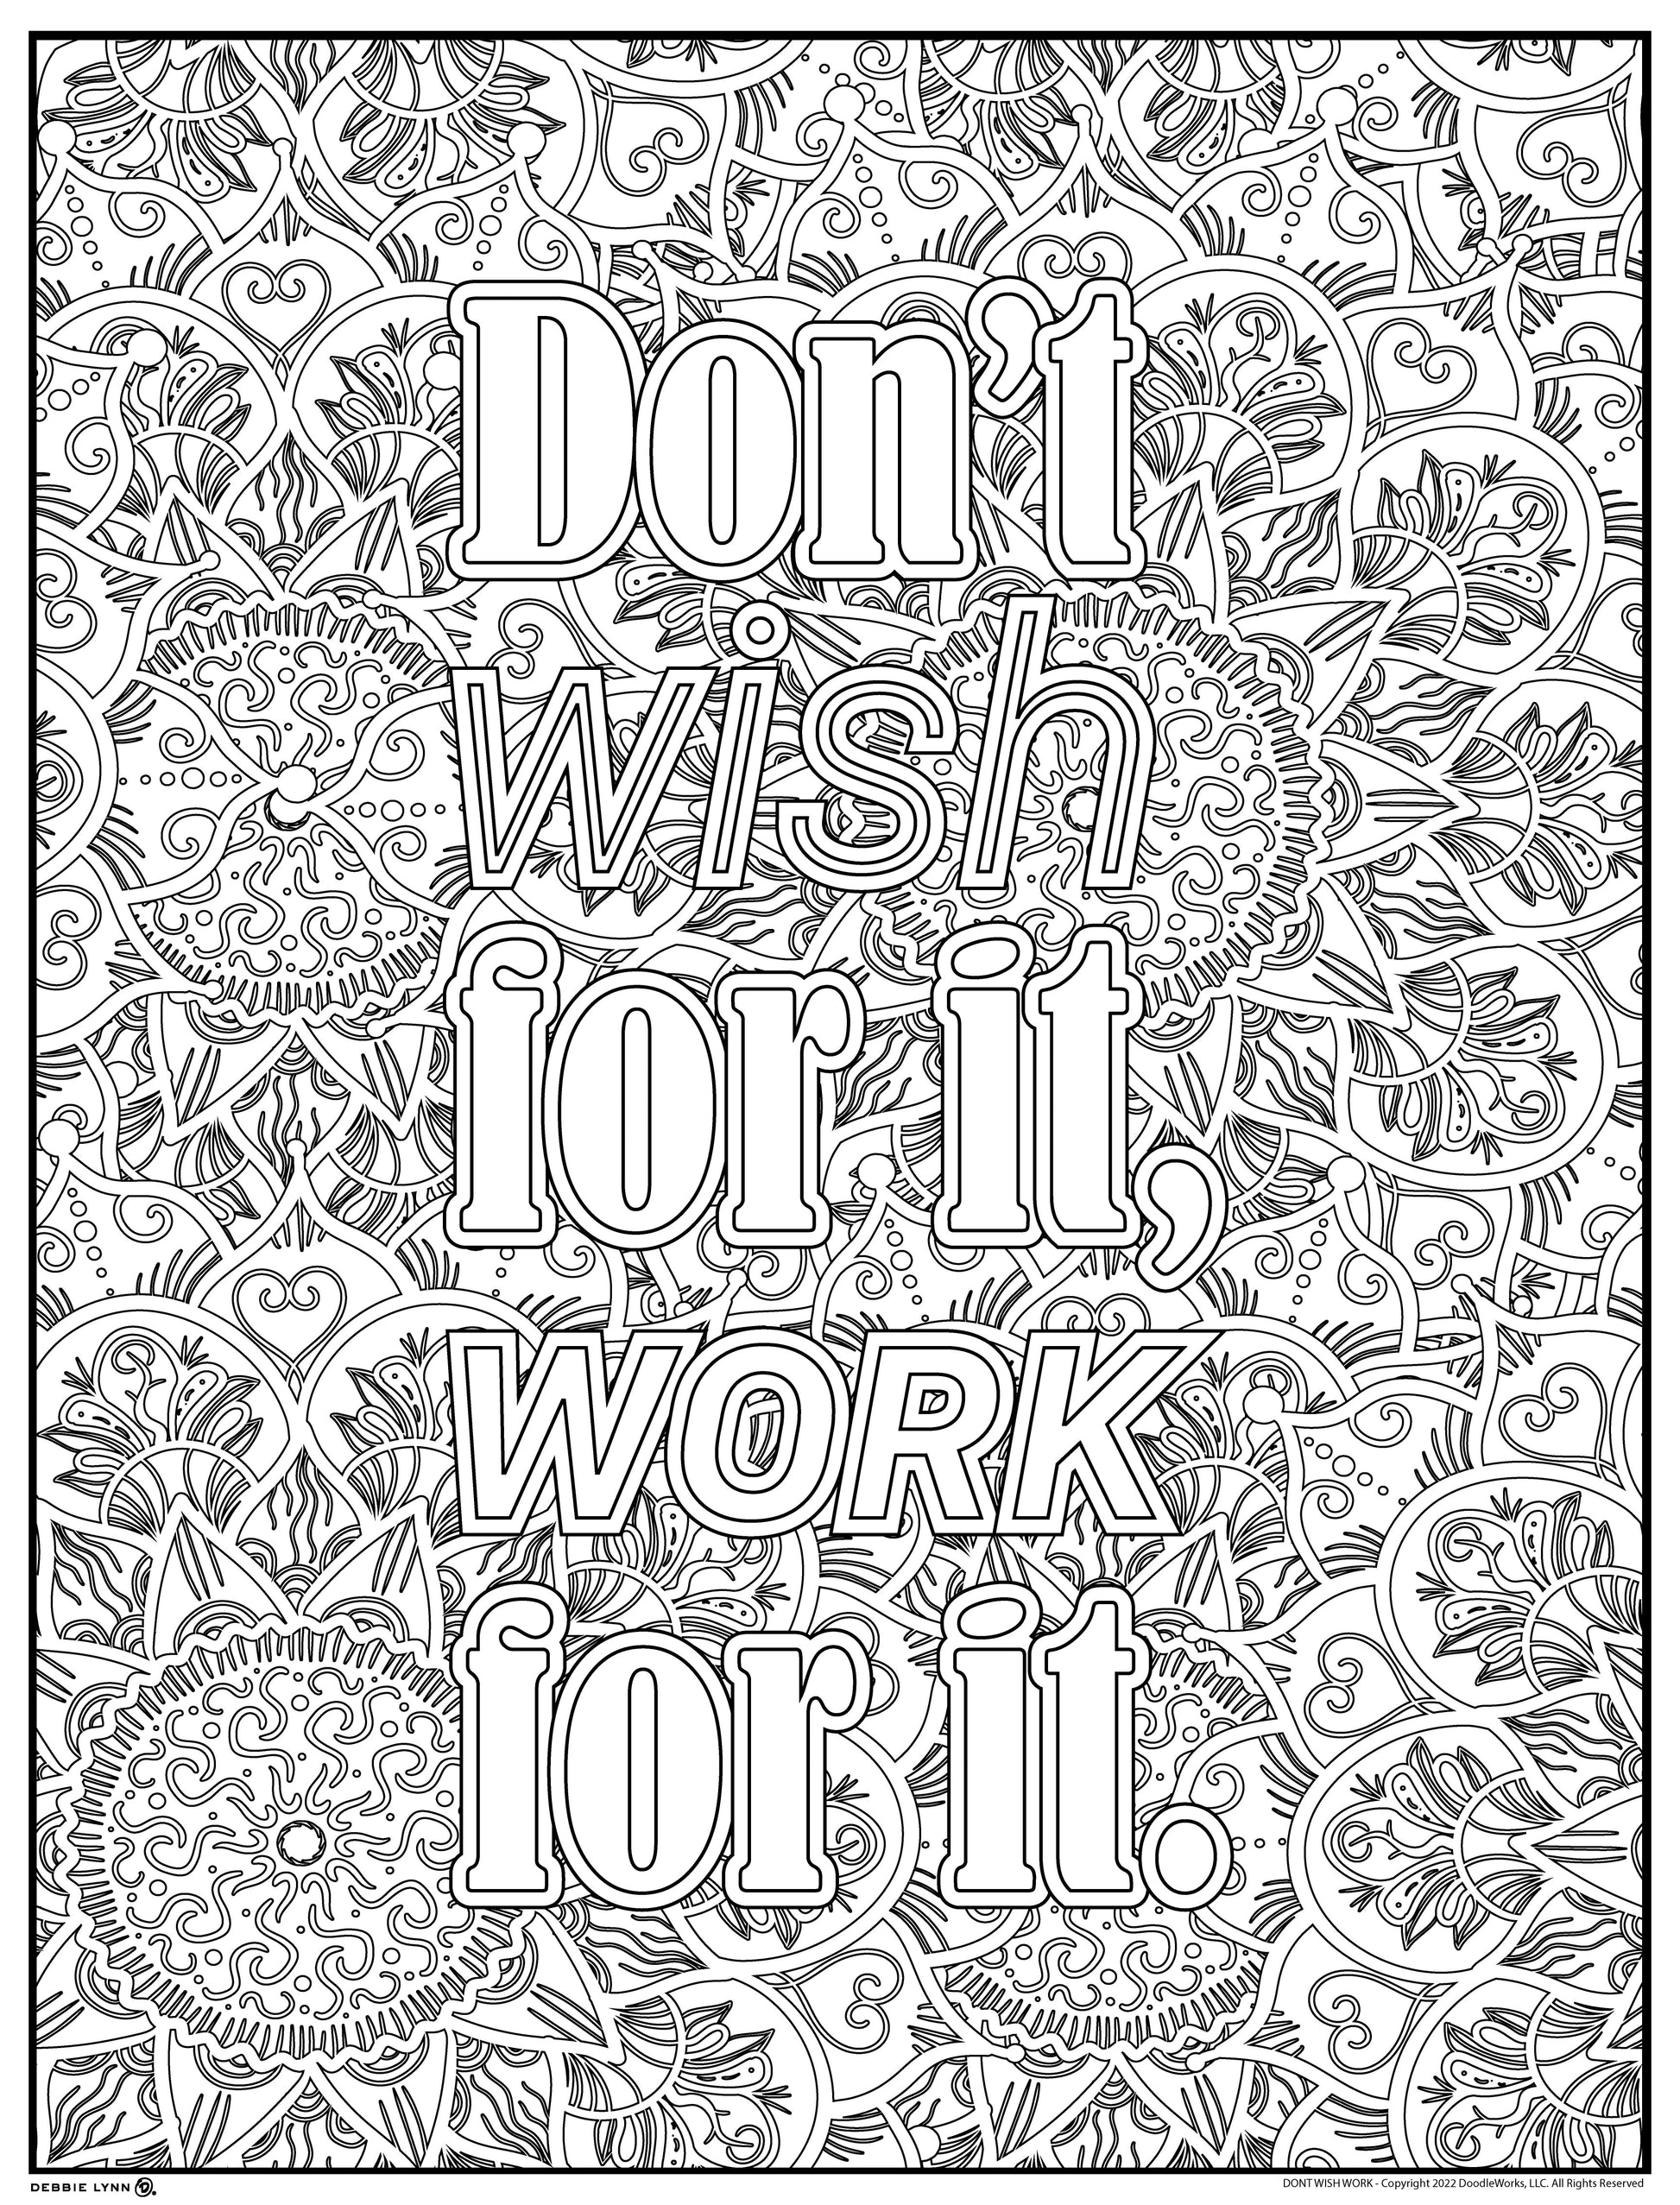 Dont wish for it work for it personalized giant coloring poster x â debbie lynn